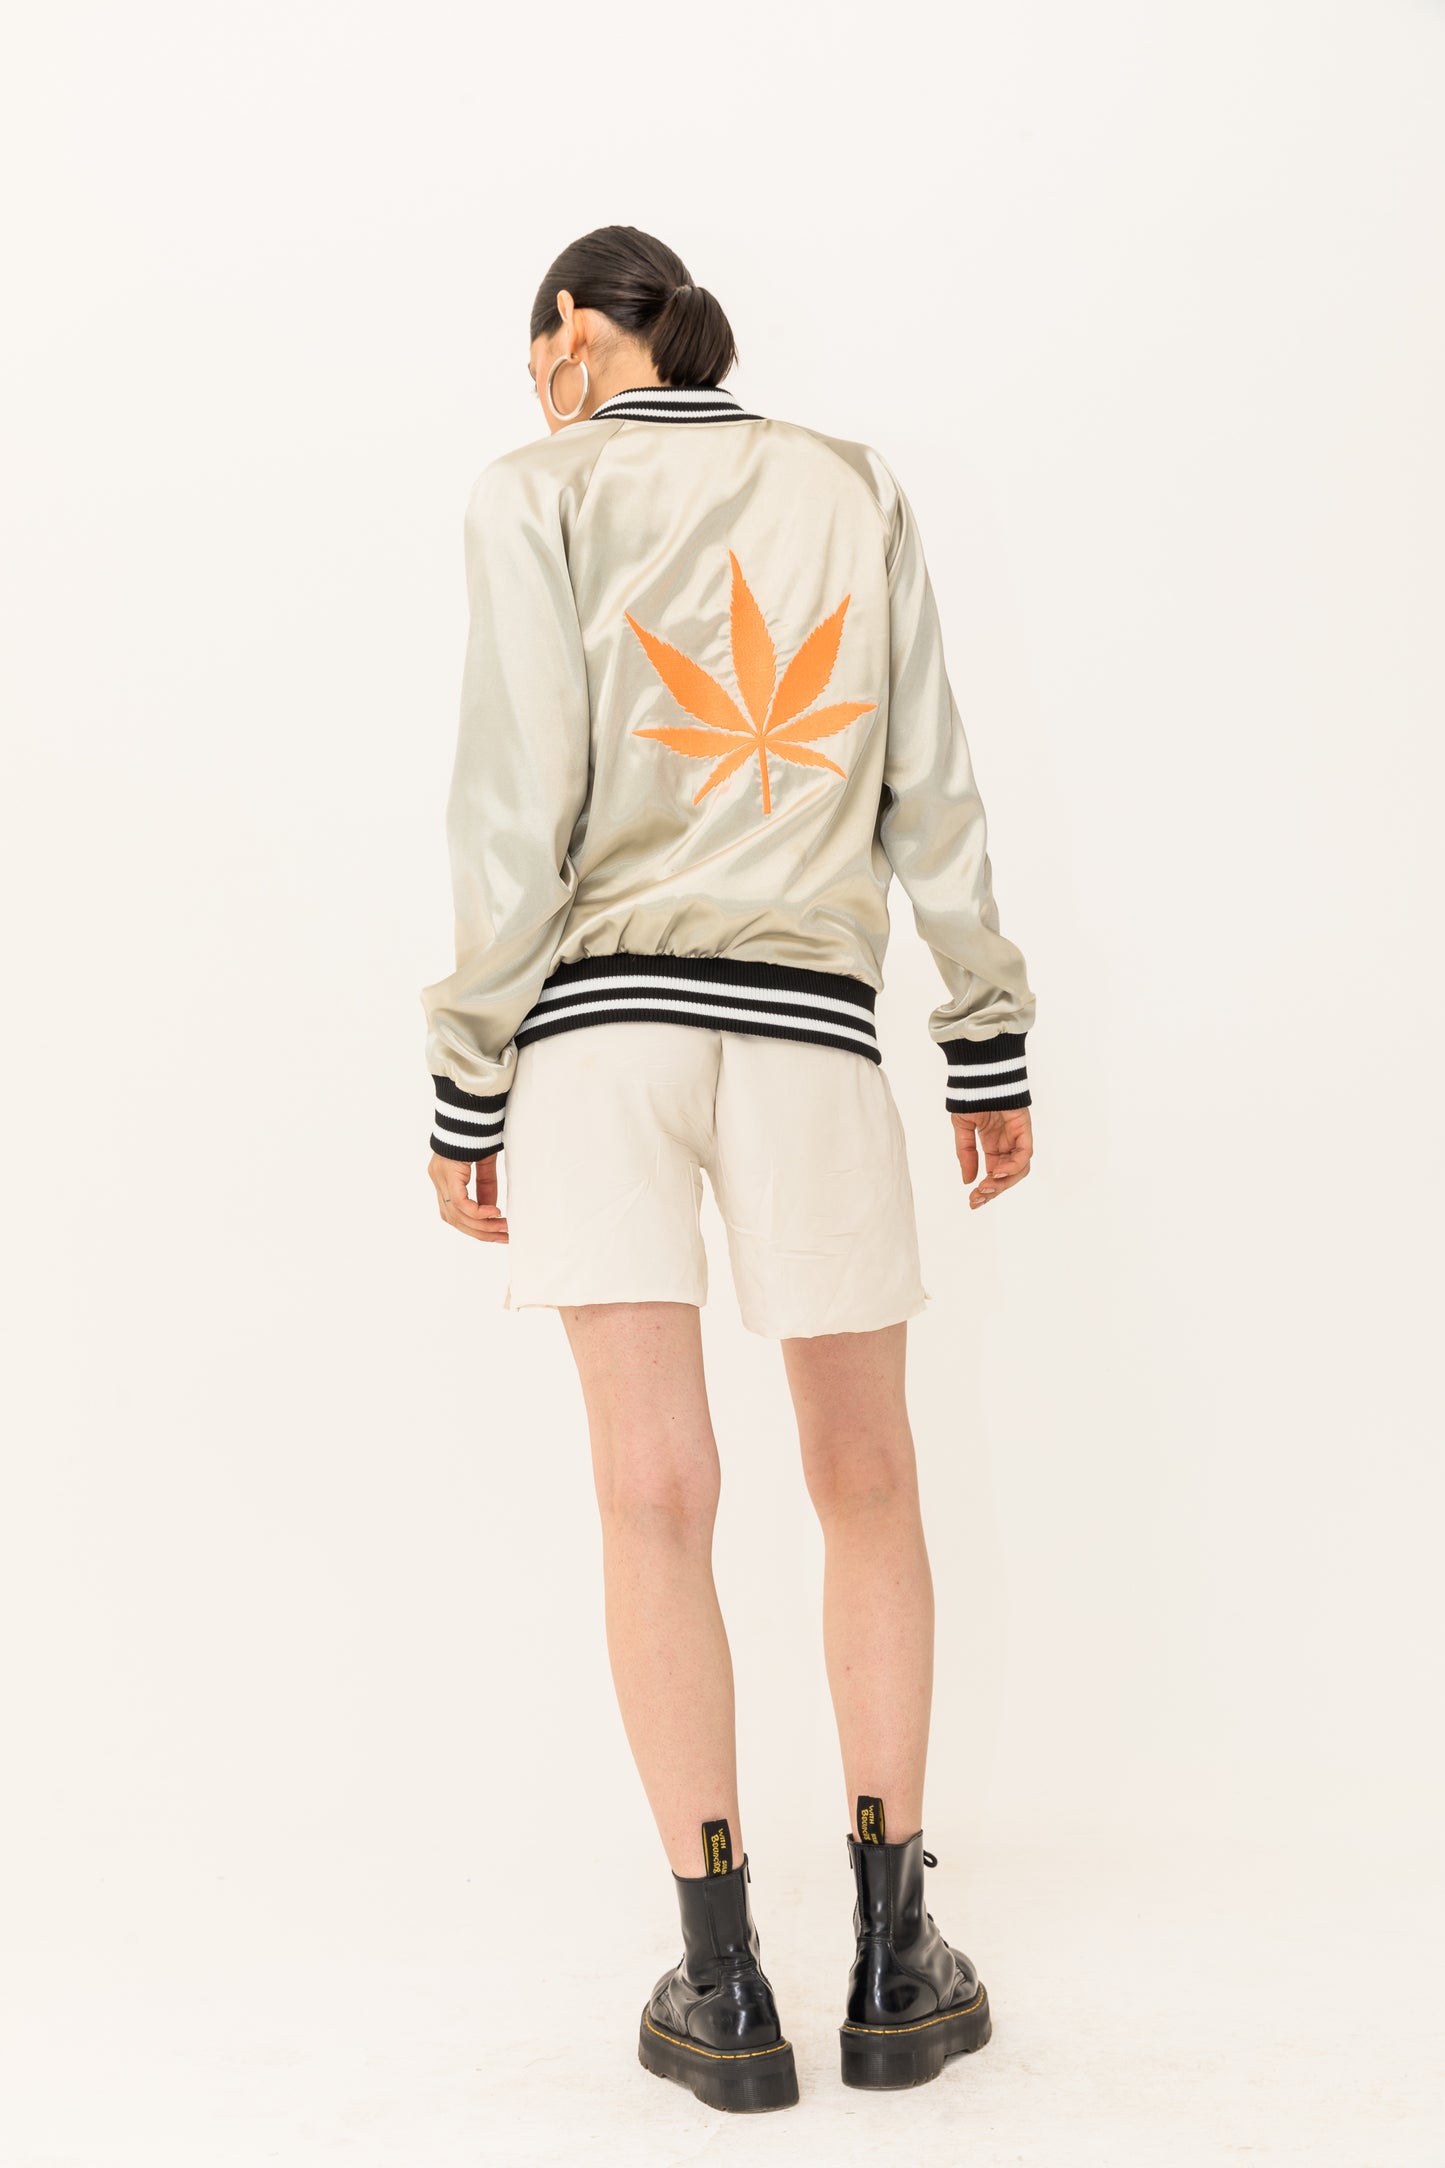 The 420 Bomber, Silver/Gold